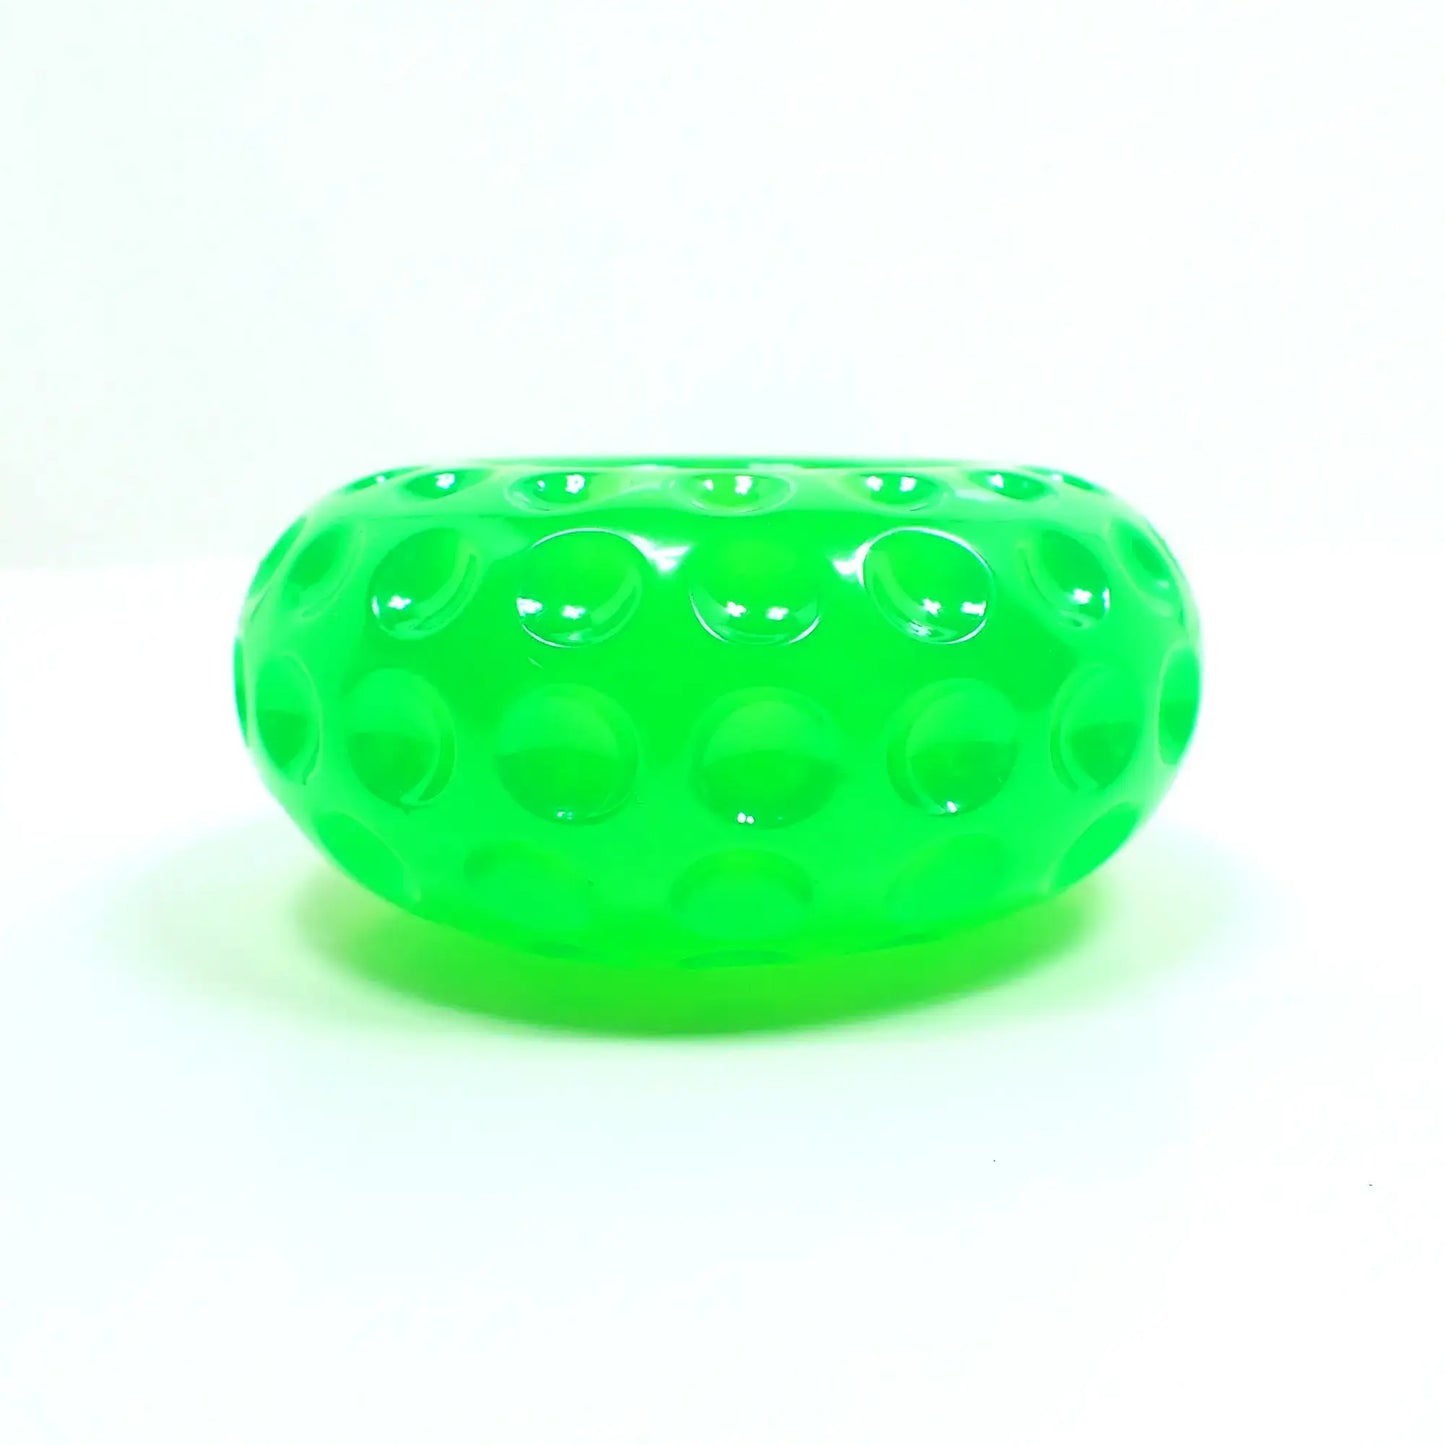 Small Handmade Bright Neon Green Resin Flameless Tea Light Candle Holder, Decorative Bowl, Puffy Rondelle Shaped with Indented Dot Pattern